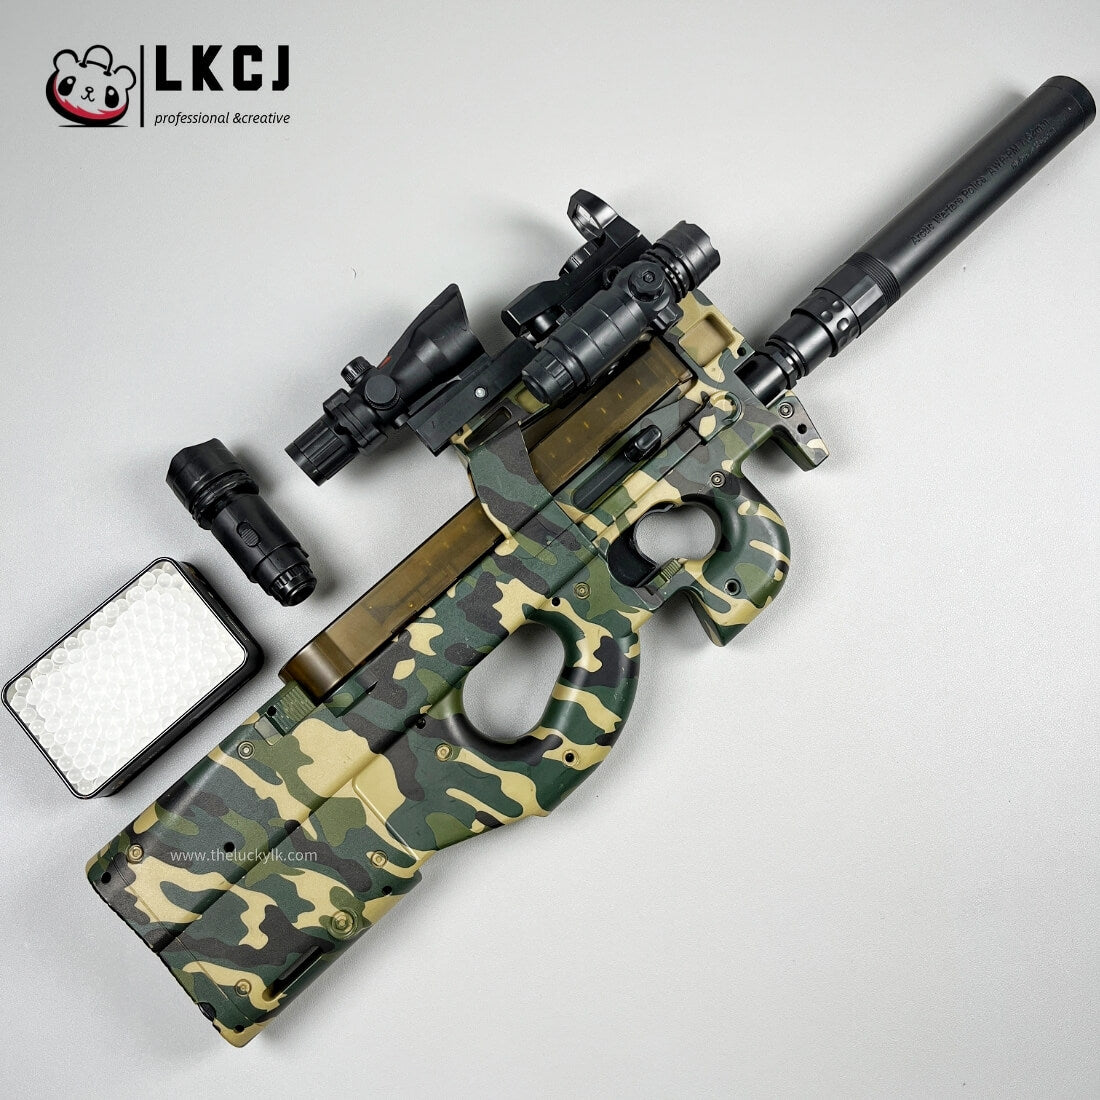 New Color P90 With Spring Compression Magazine-LKCJ Recommended